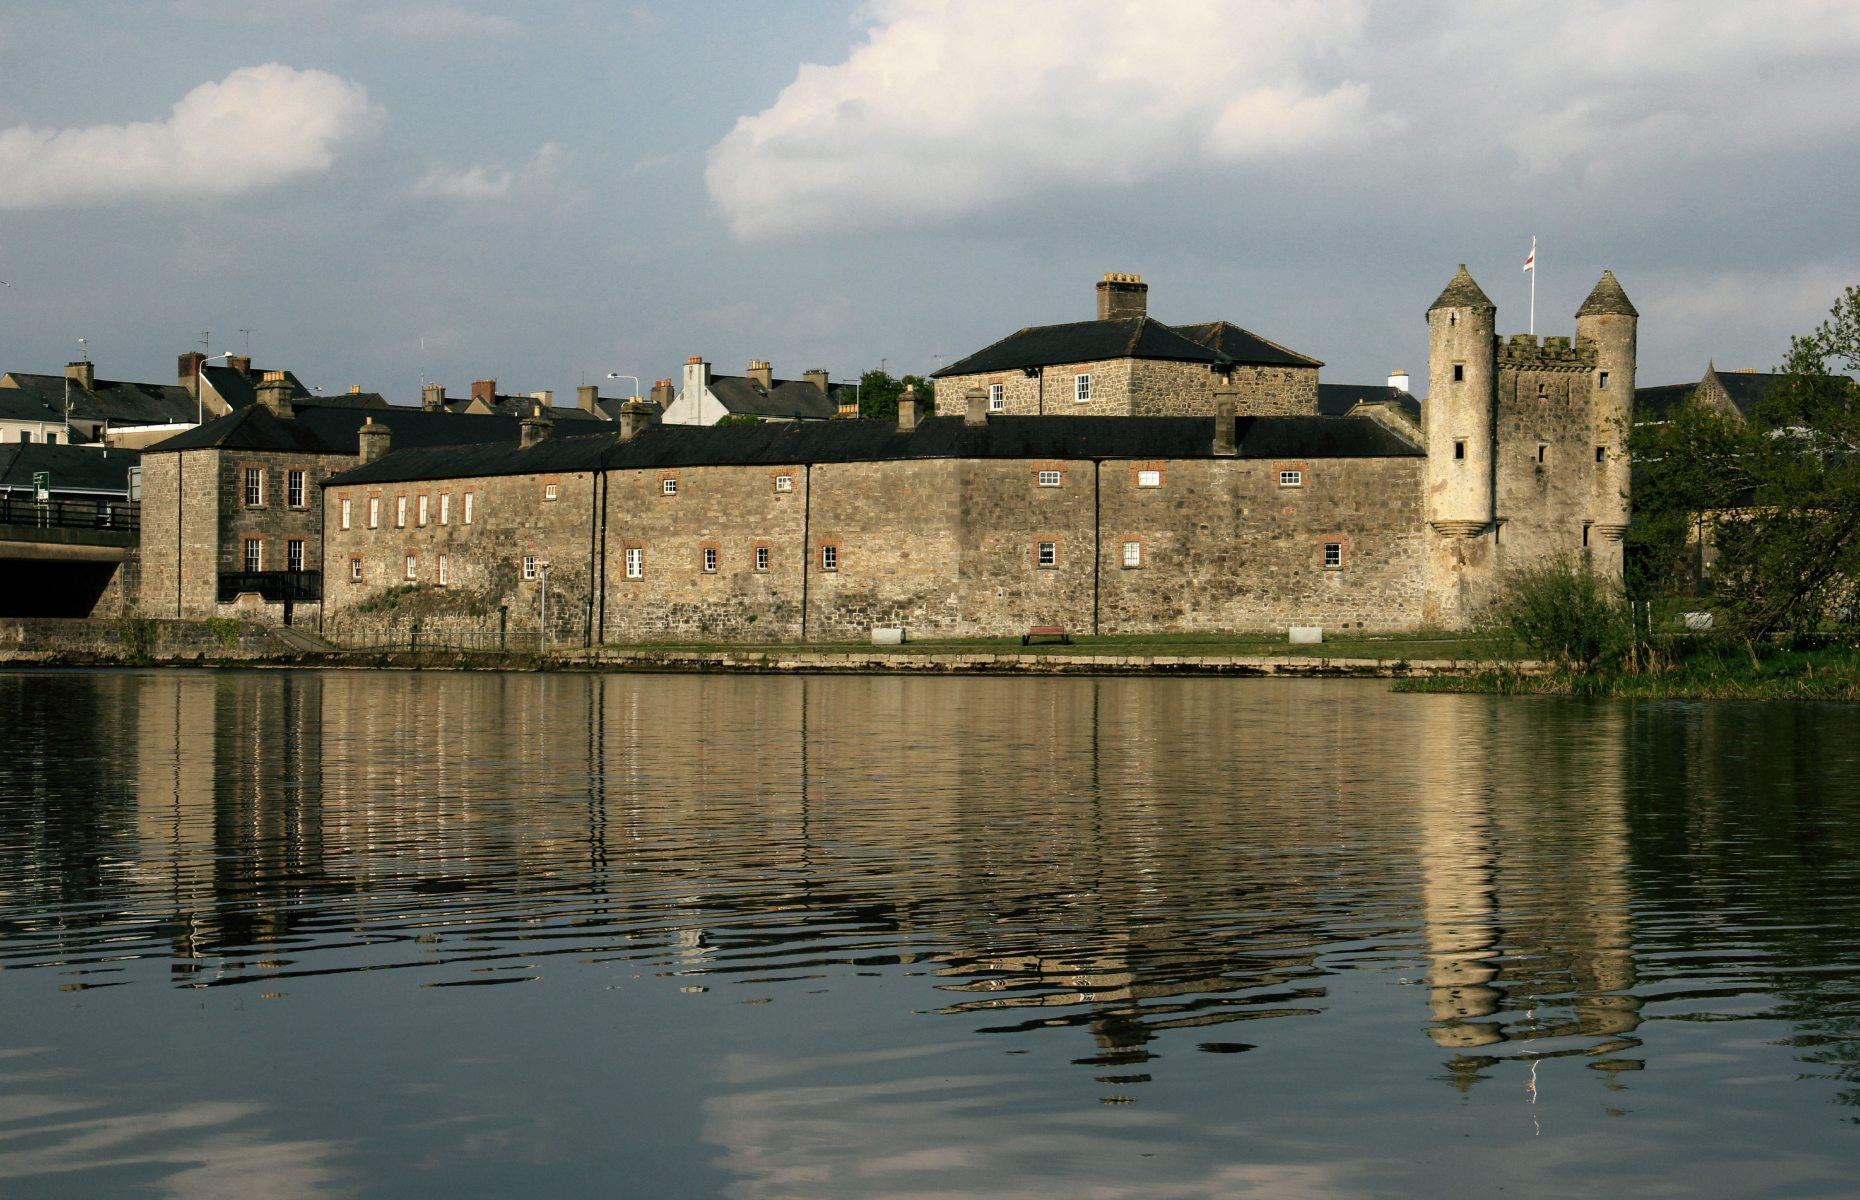 <p>Nestled on an island in charming County Fermanagh, Enniskillen benefits from a charming waterside location. Enniskillen Castle, built in the 15th century, features two museums: the Fermanagh County Museum, which showcases traditional culture and crafts, and the Inniskillings Museum, where you can discover the area’s vast military past. To visit another impressive site, hop on a bike and cycle three miles (5km) to Castle Coole while enjoying beautiful scenery along the way. For shopping head to the Buttermarket, where you can find several shops, cafés and galleries.</p>